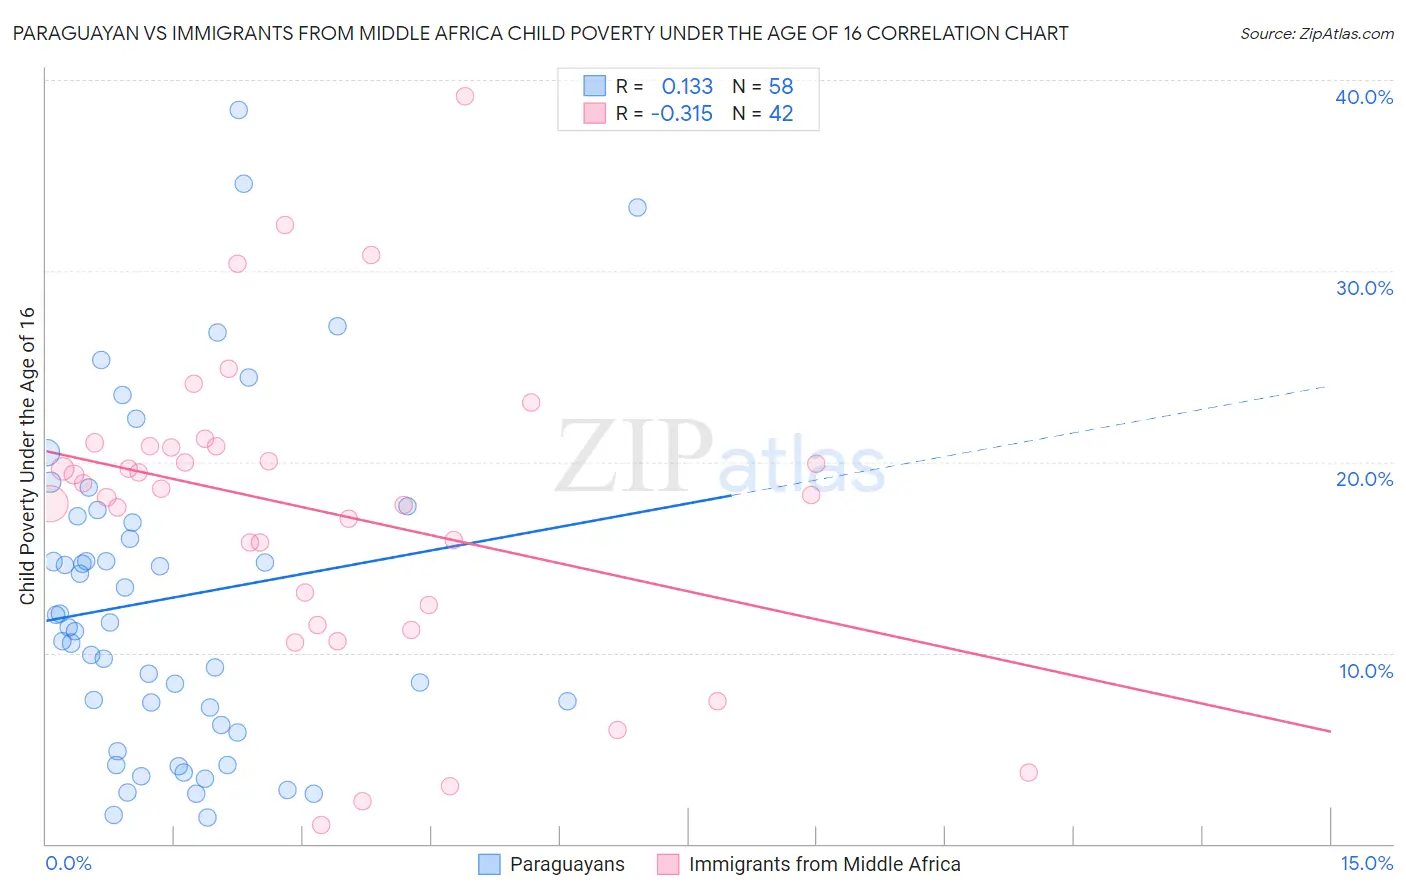 Paraguayan vs Immigrants from Middle Africa Child Poverty Under the Age of 16